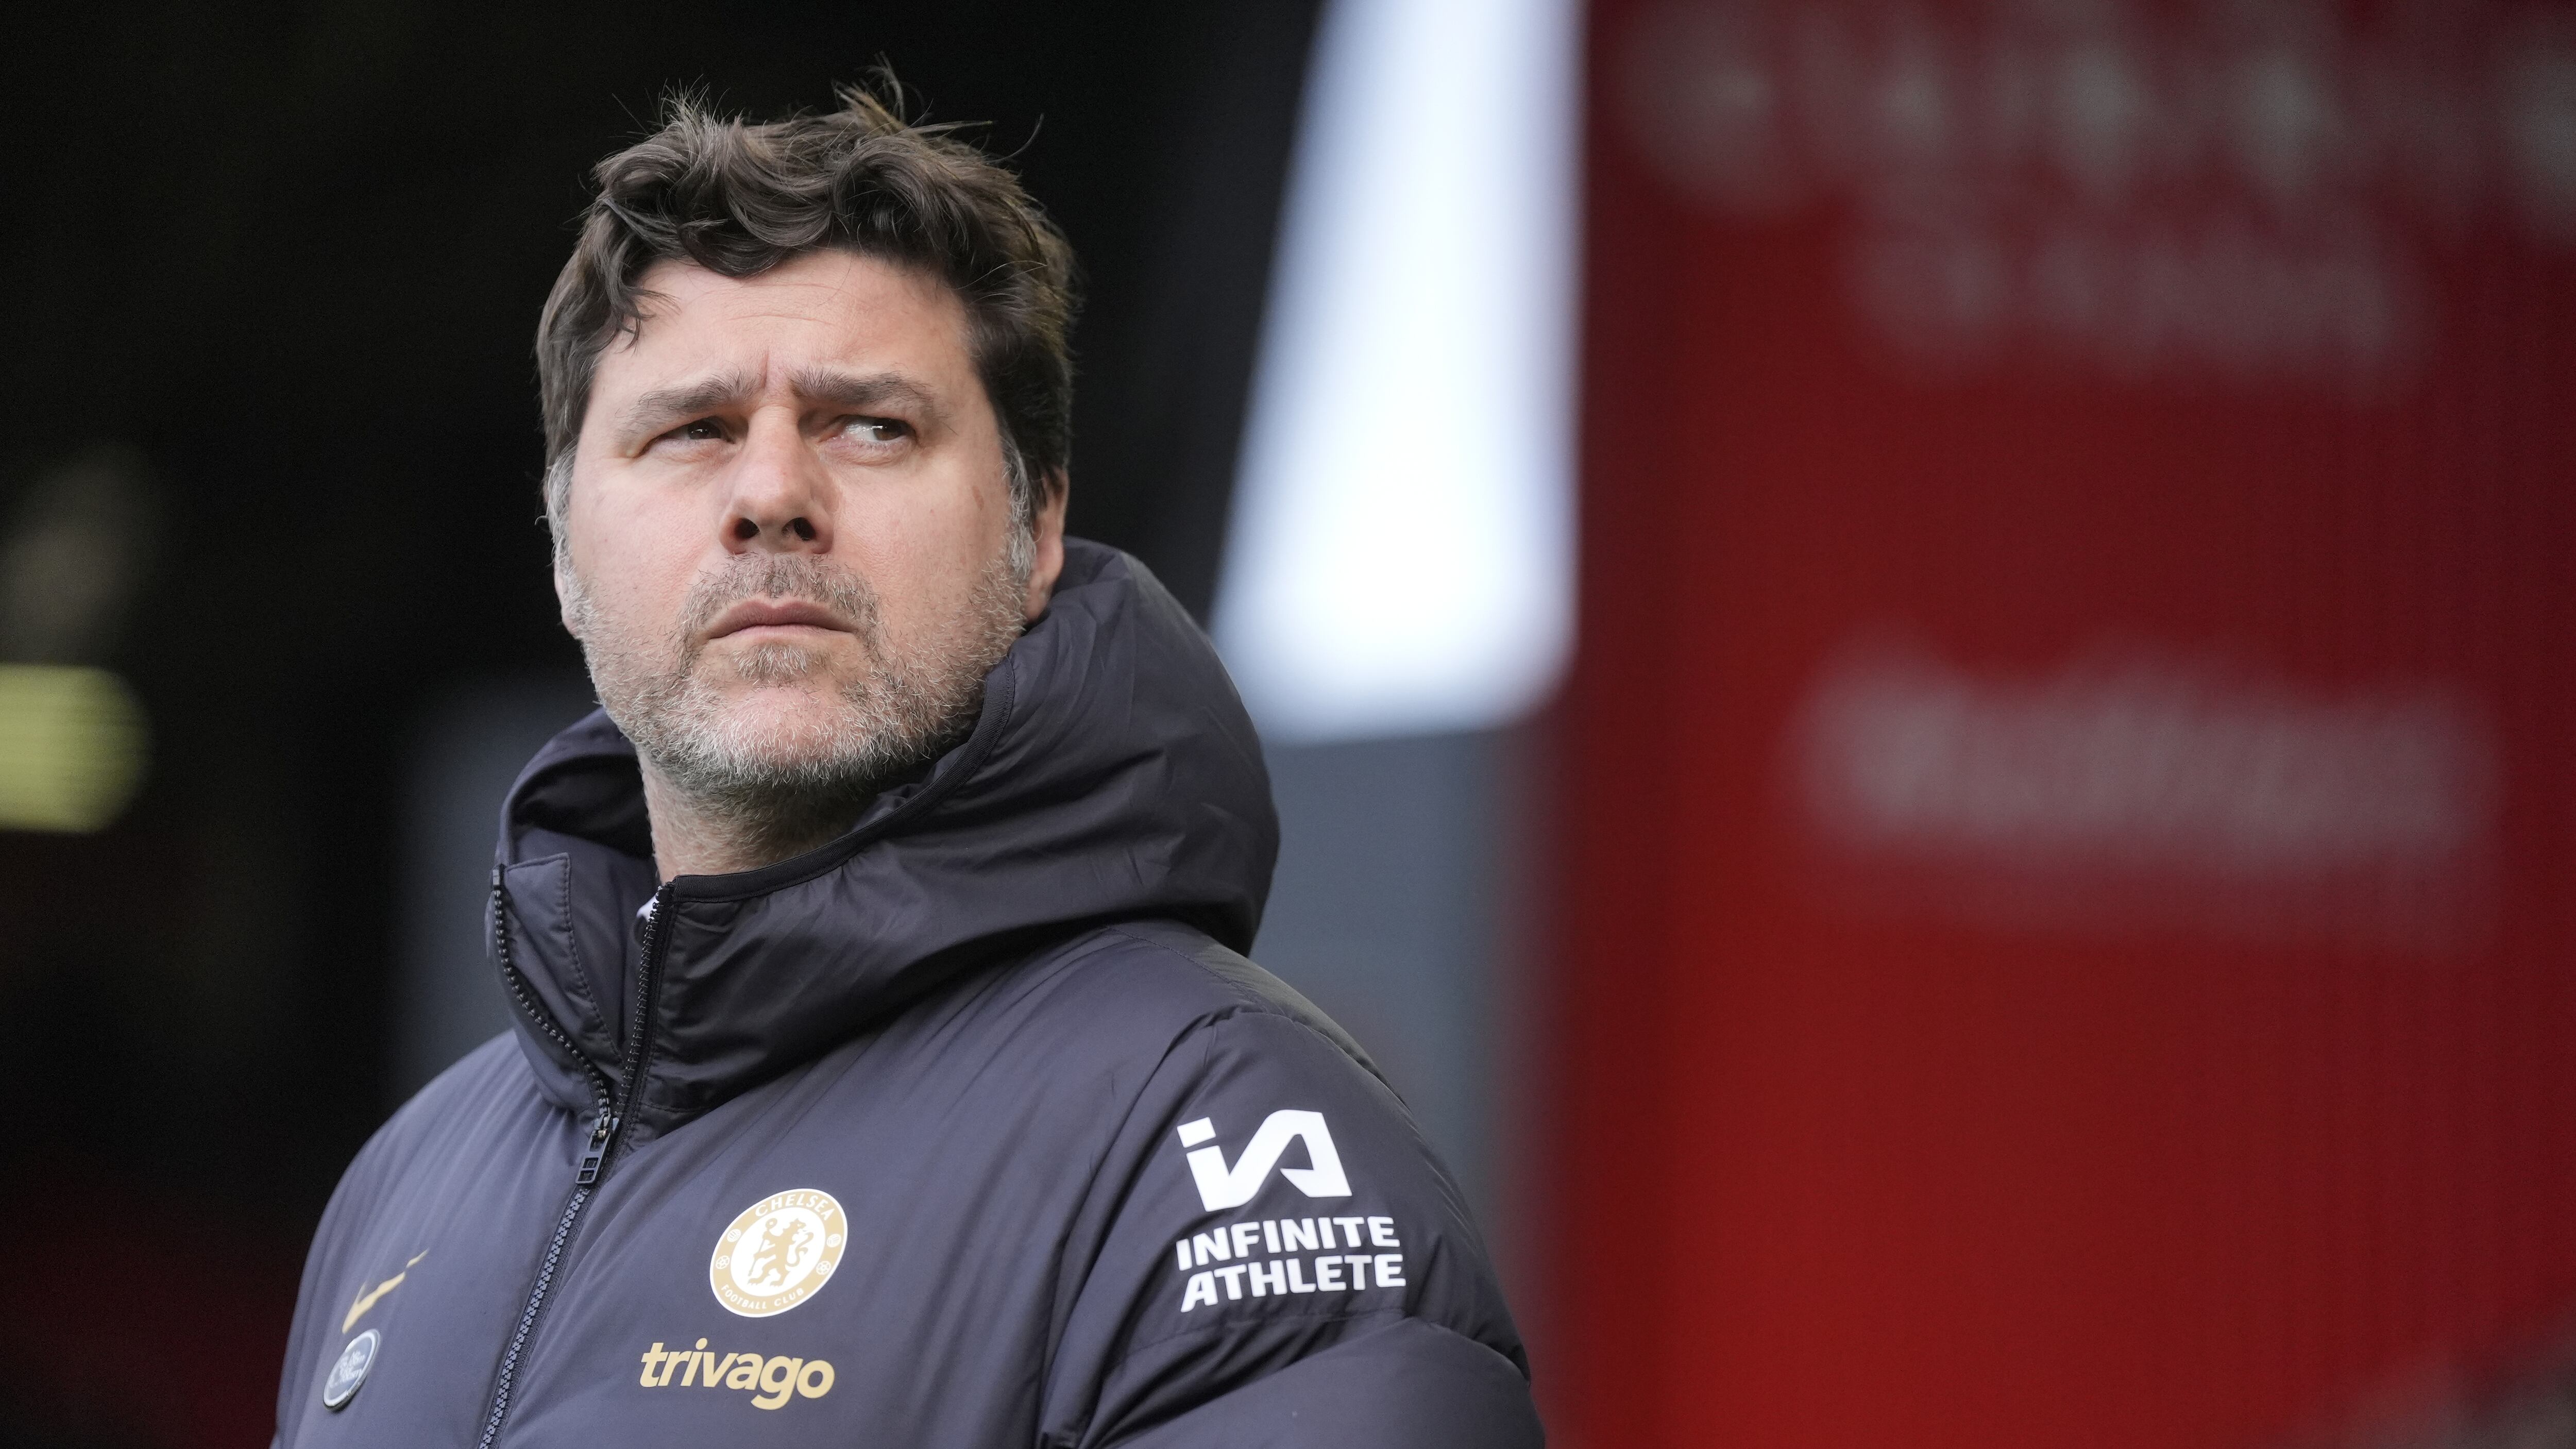 Mauricio Pochettino said it would not be the end of the world if he departed Chelsea